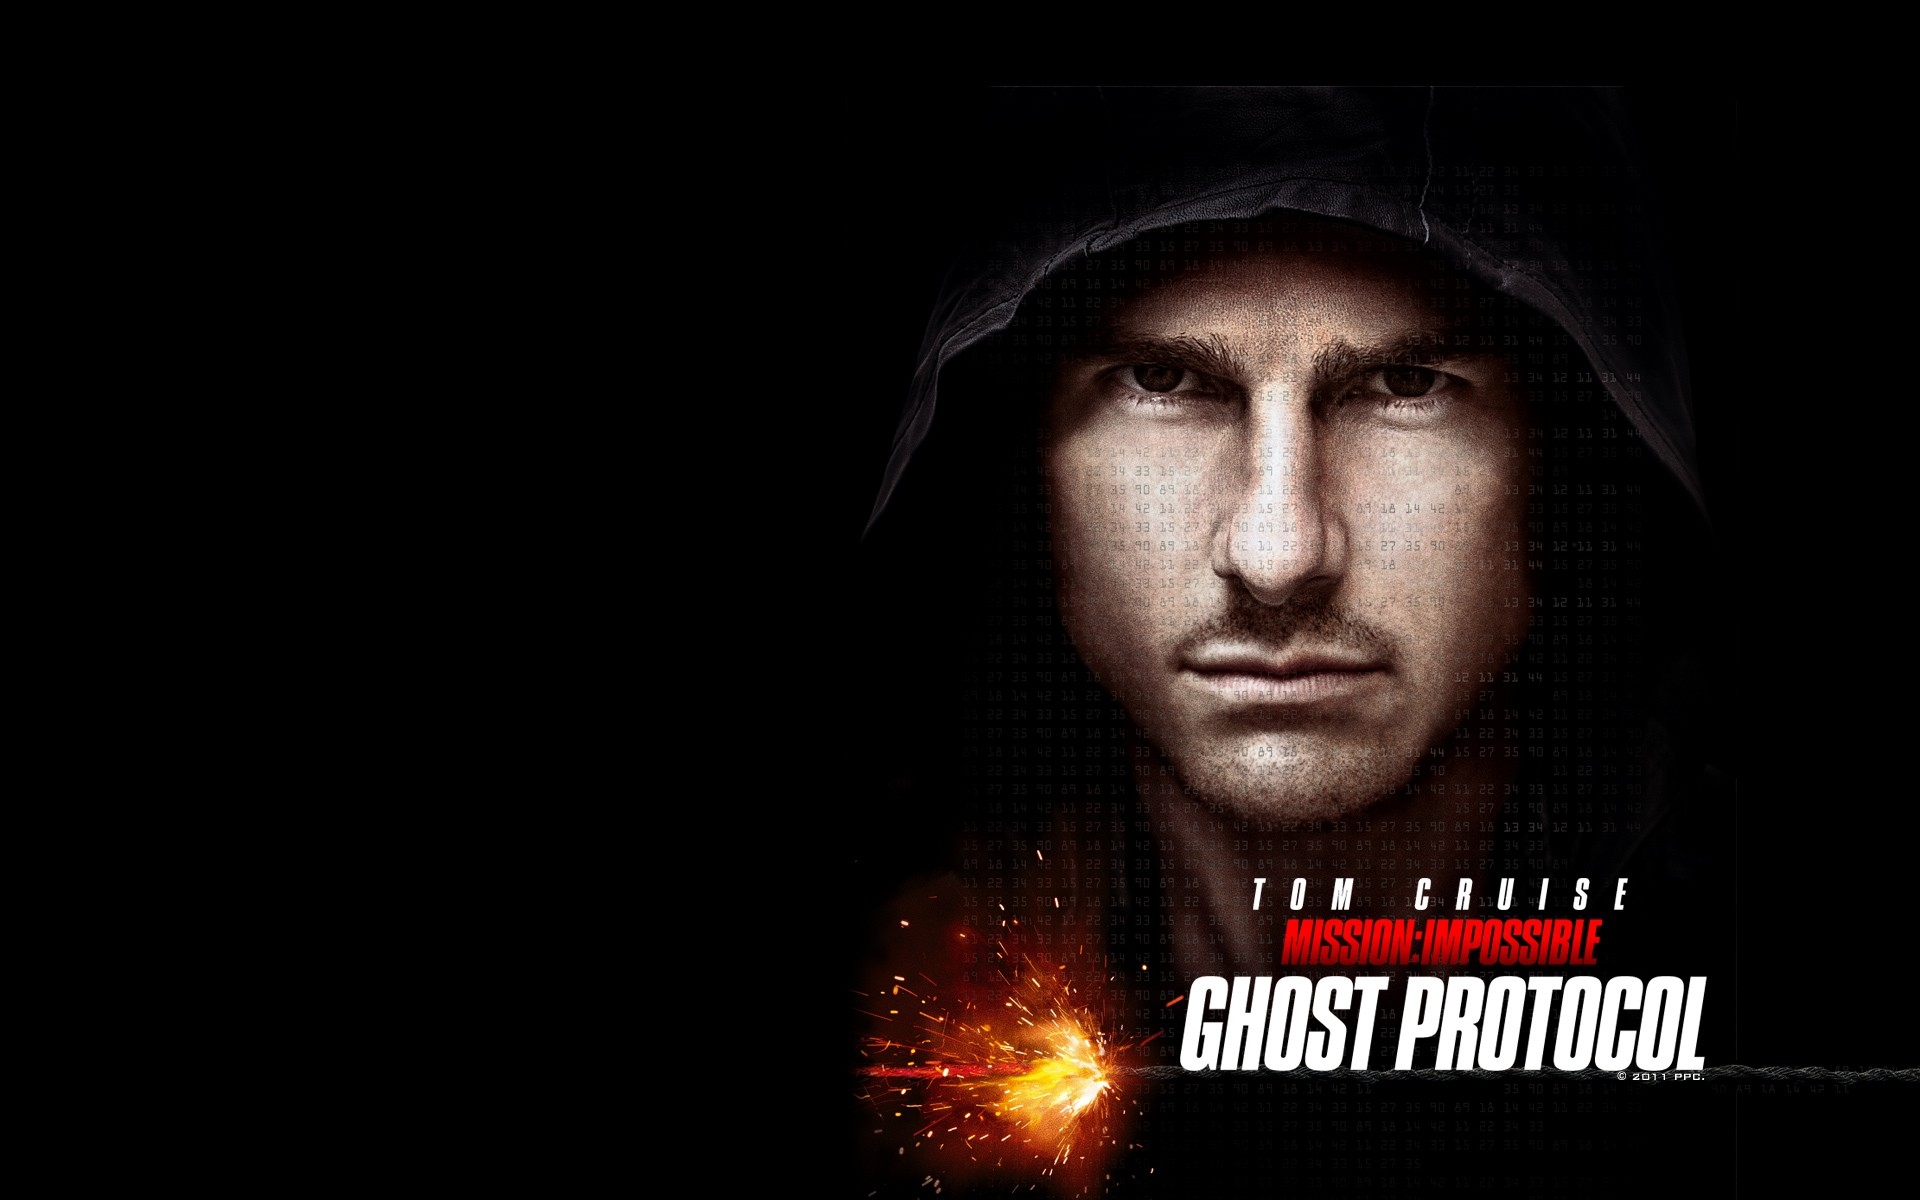 mission: impossible, movie, mission: impossible ghost protocol